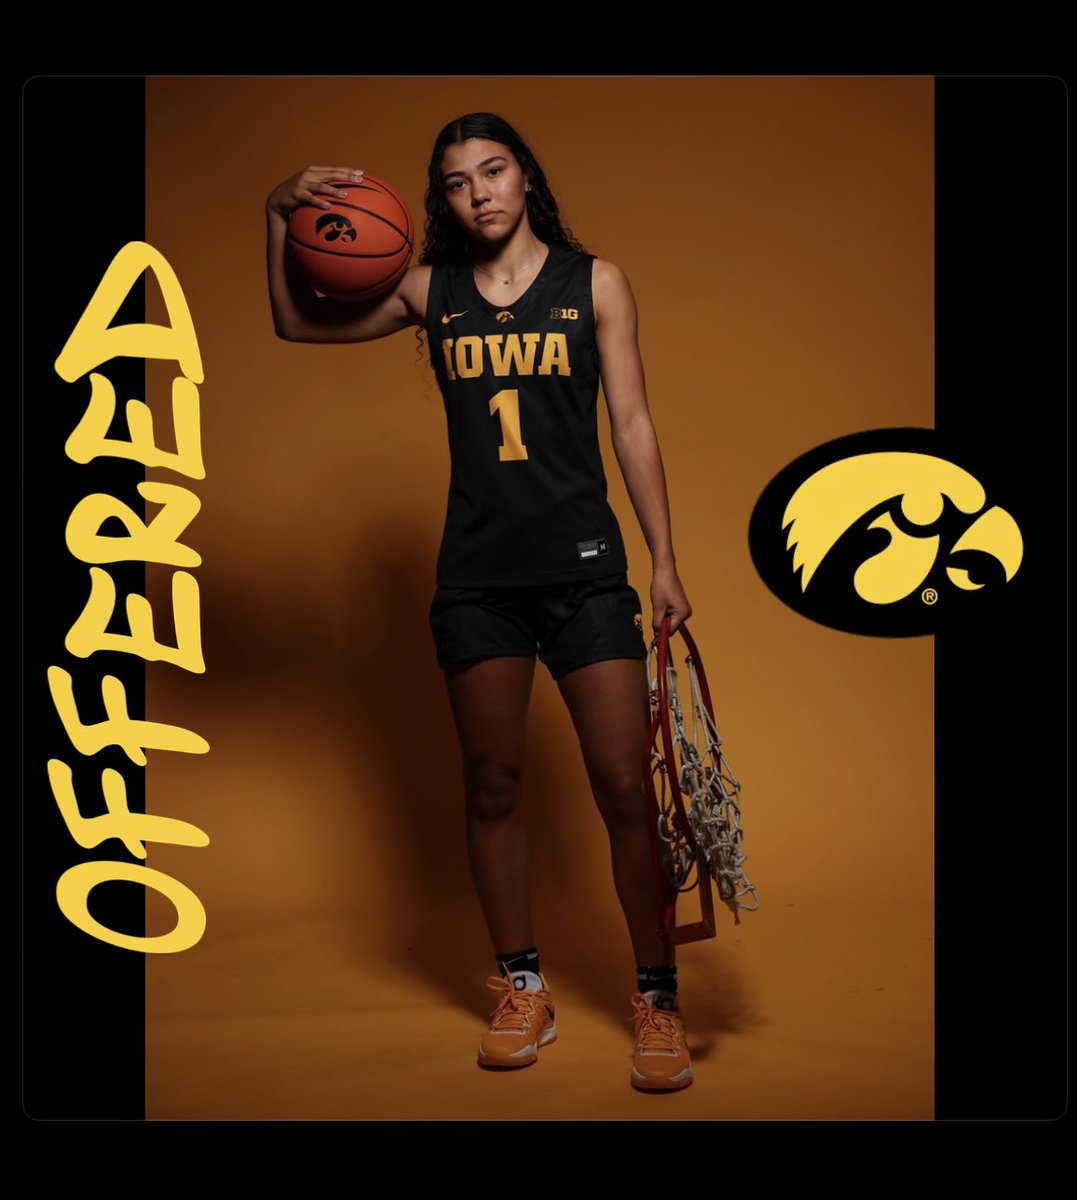 Huge thank you to the @IowaWBB staff for the offer to be a Hawkeye and a great time on campus!! #GoHawkeyes